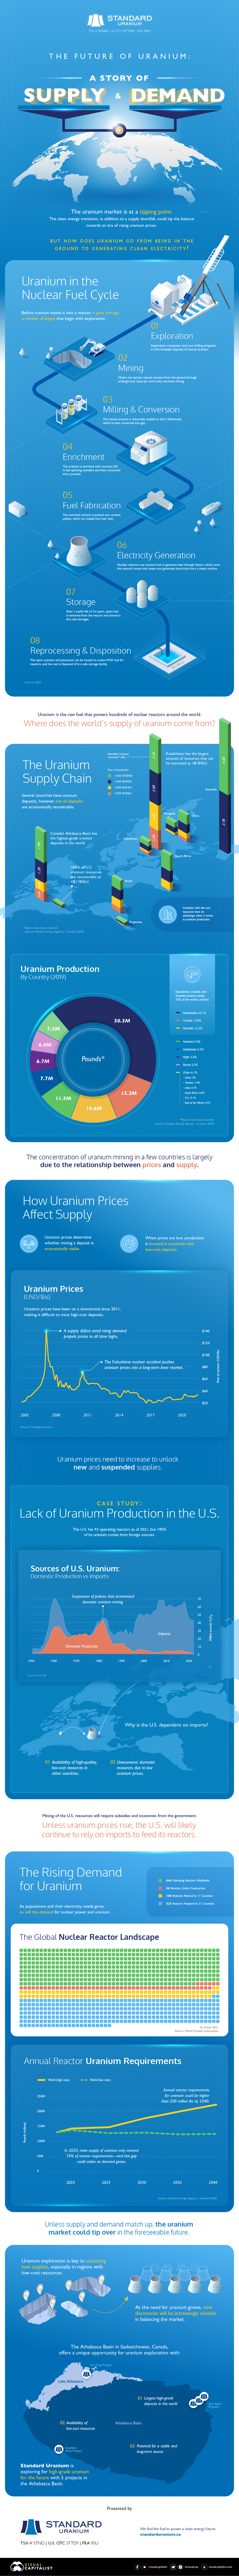 The future of uranium: A story of supply and demand